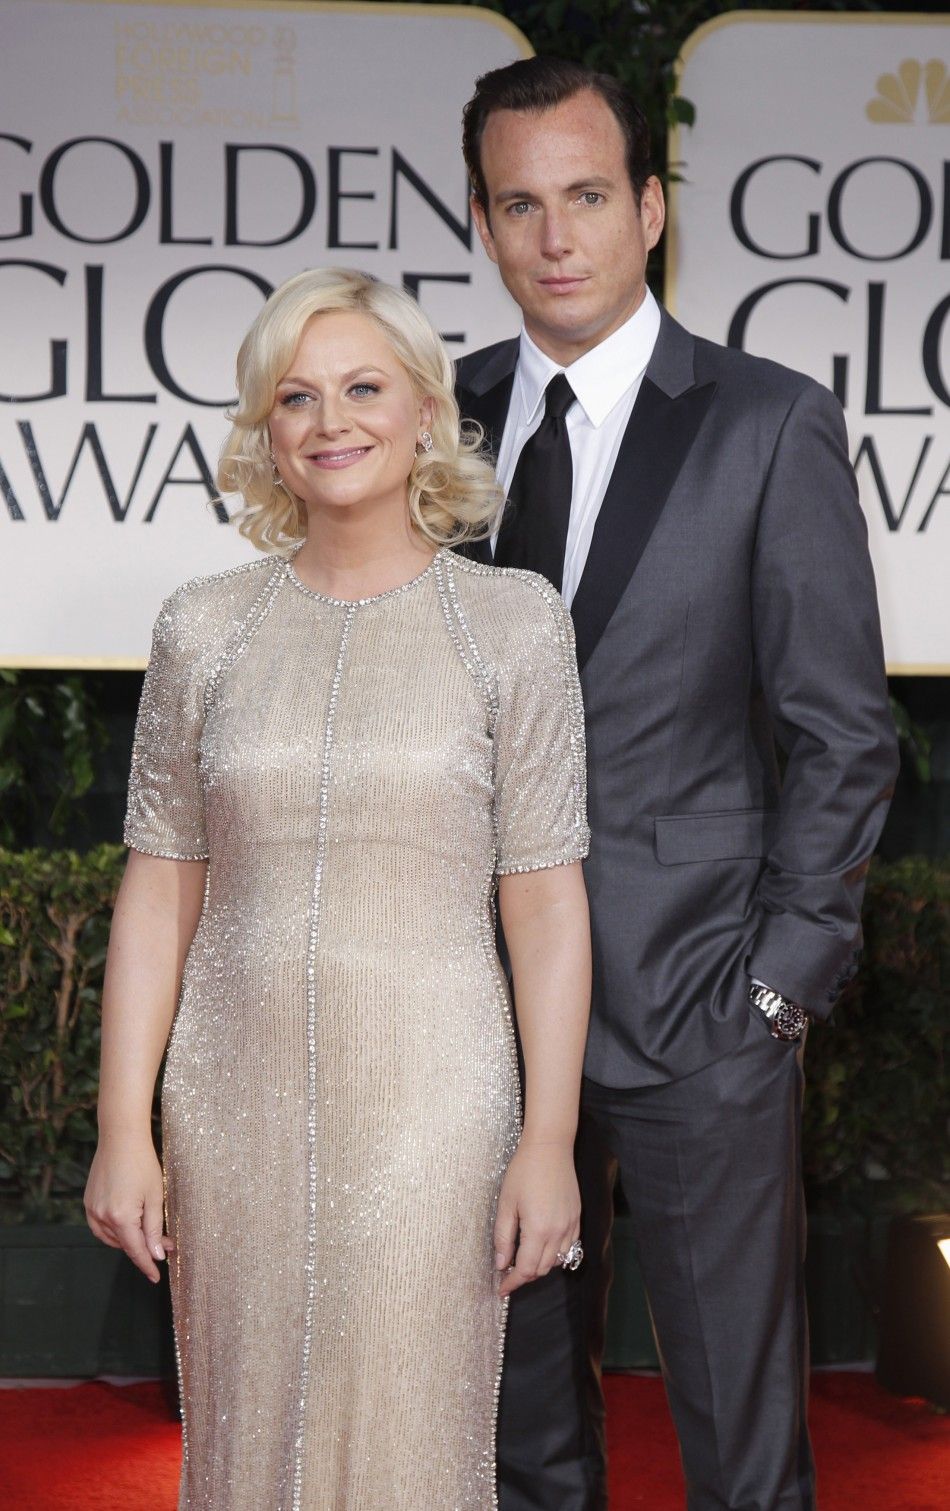 Actress Amy Poehler L and her husband, actor Will Arnett, arrive at the 69th annual Golden Globe Awards in Beverly Hills, California January 15, 2012.